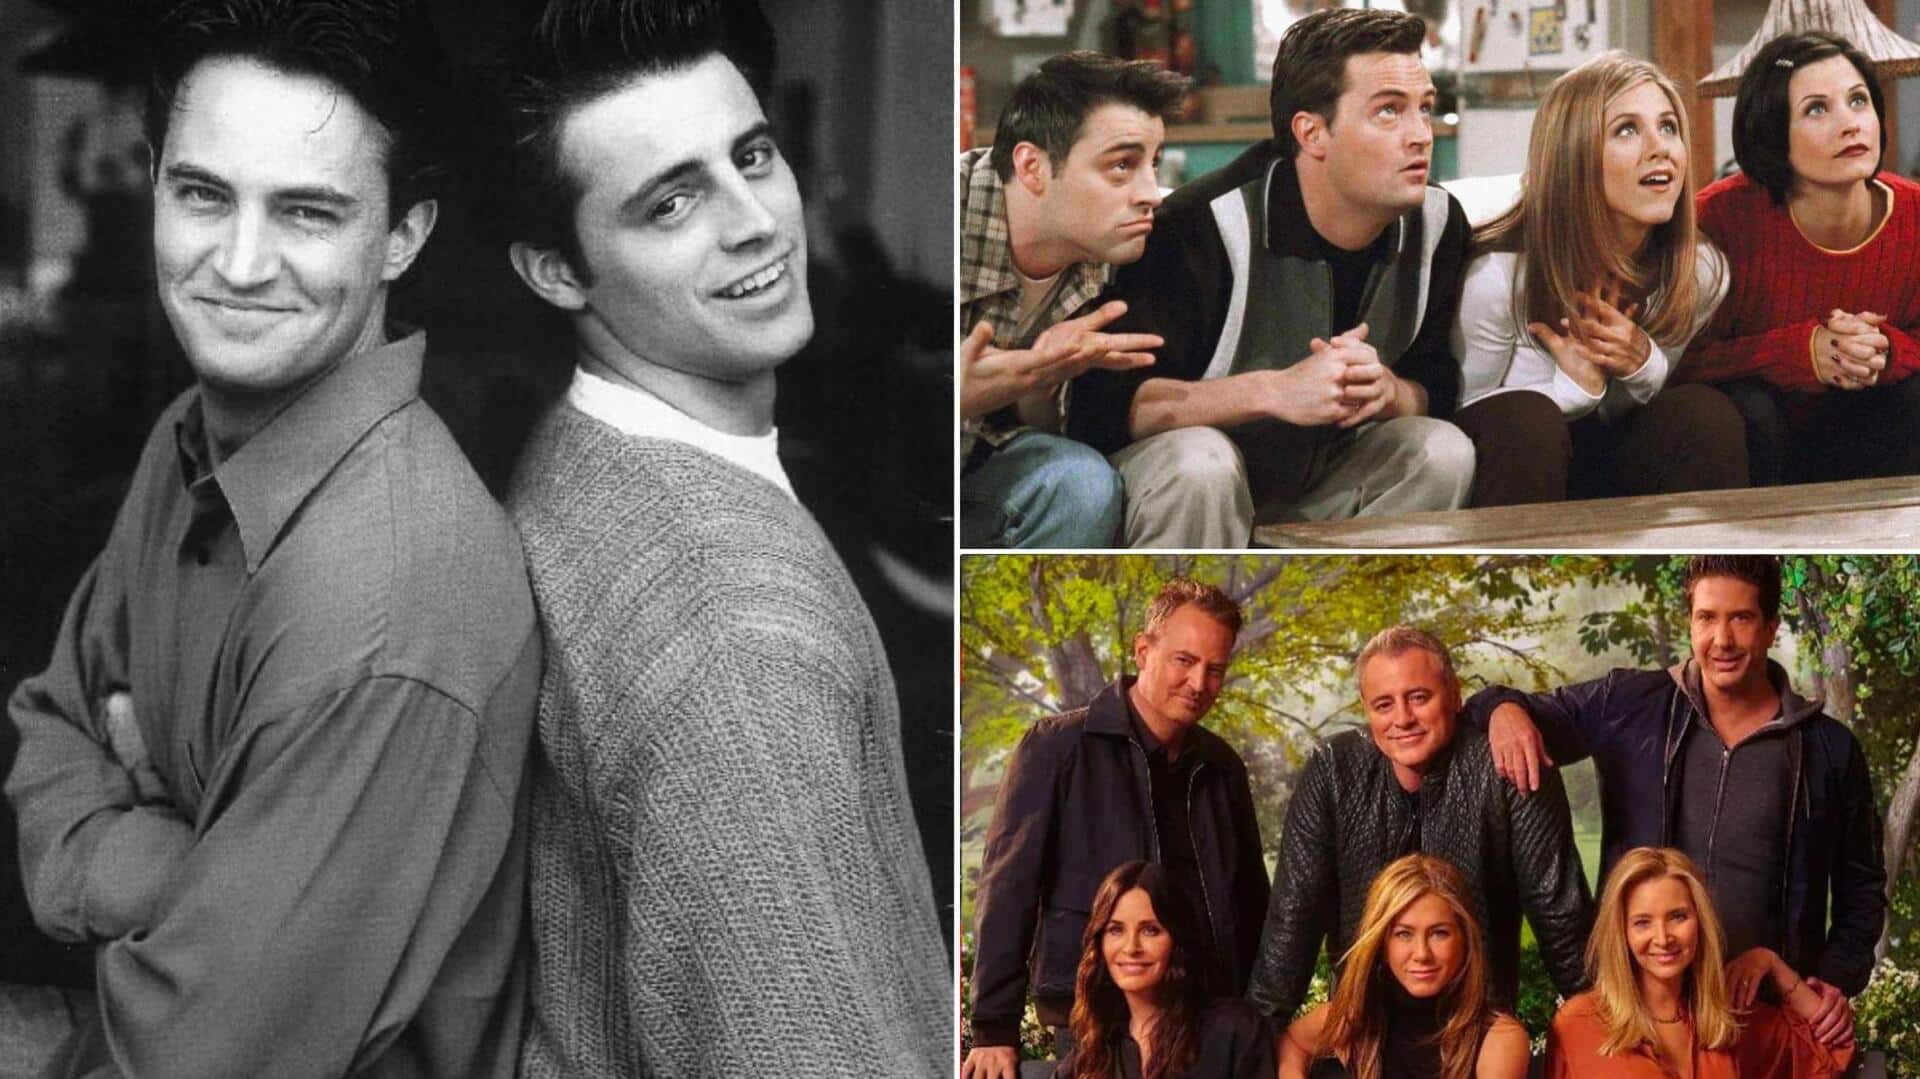 'Devastated' 'F.R.I.E.N.D.S' cast breaks silence on co-star Matthew Perry's passing